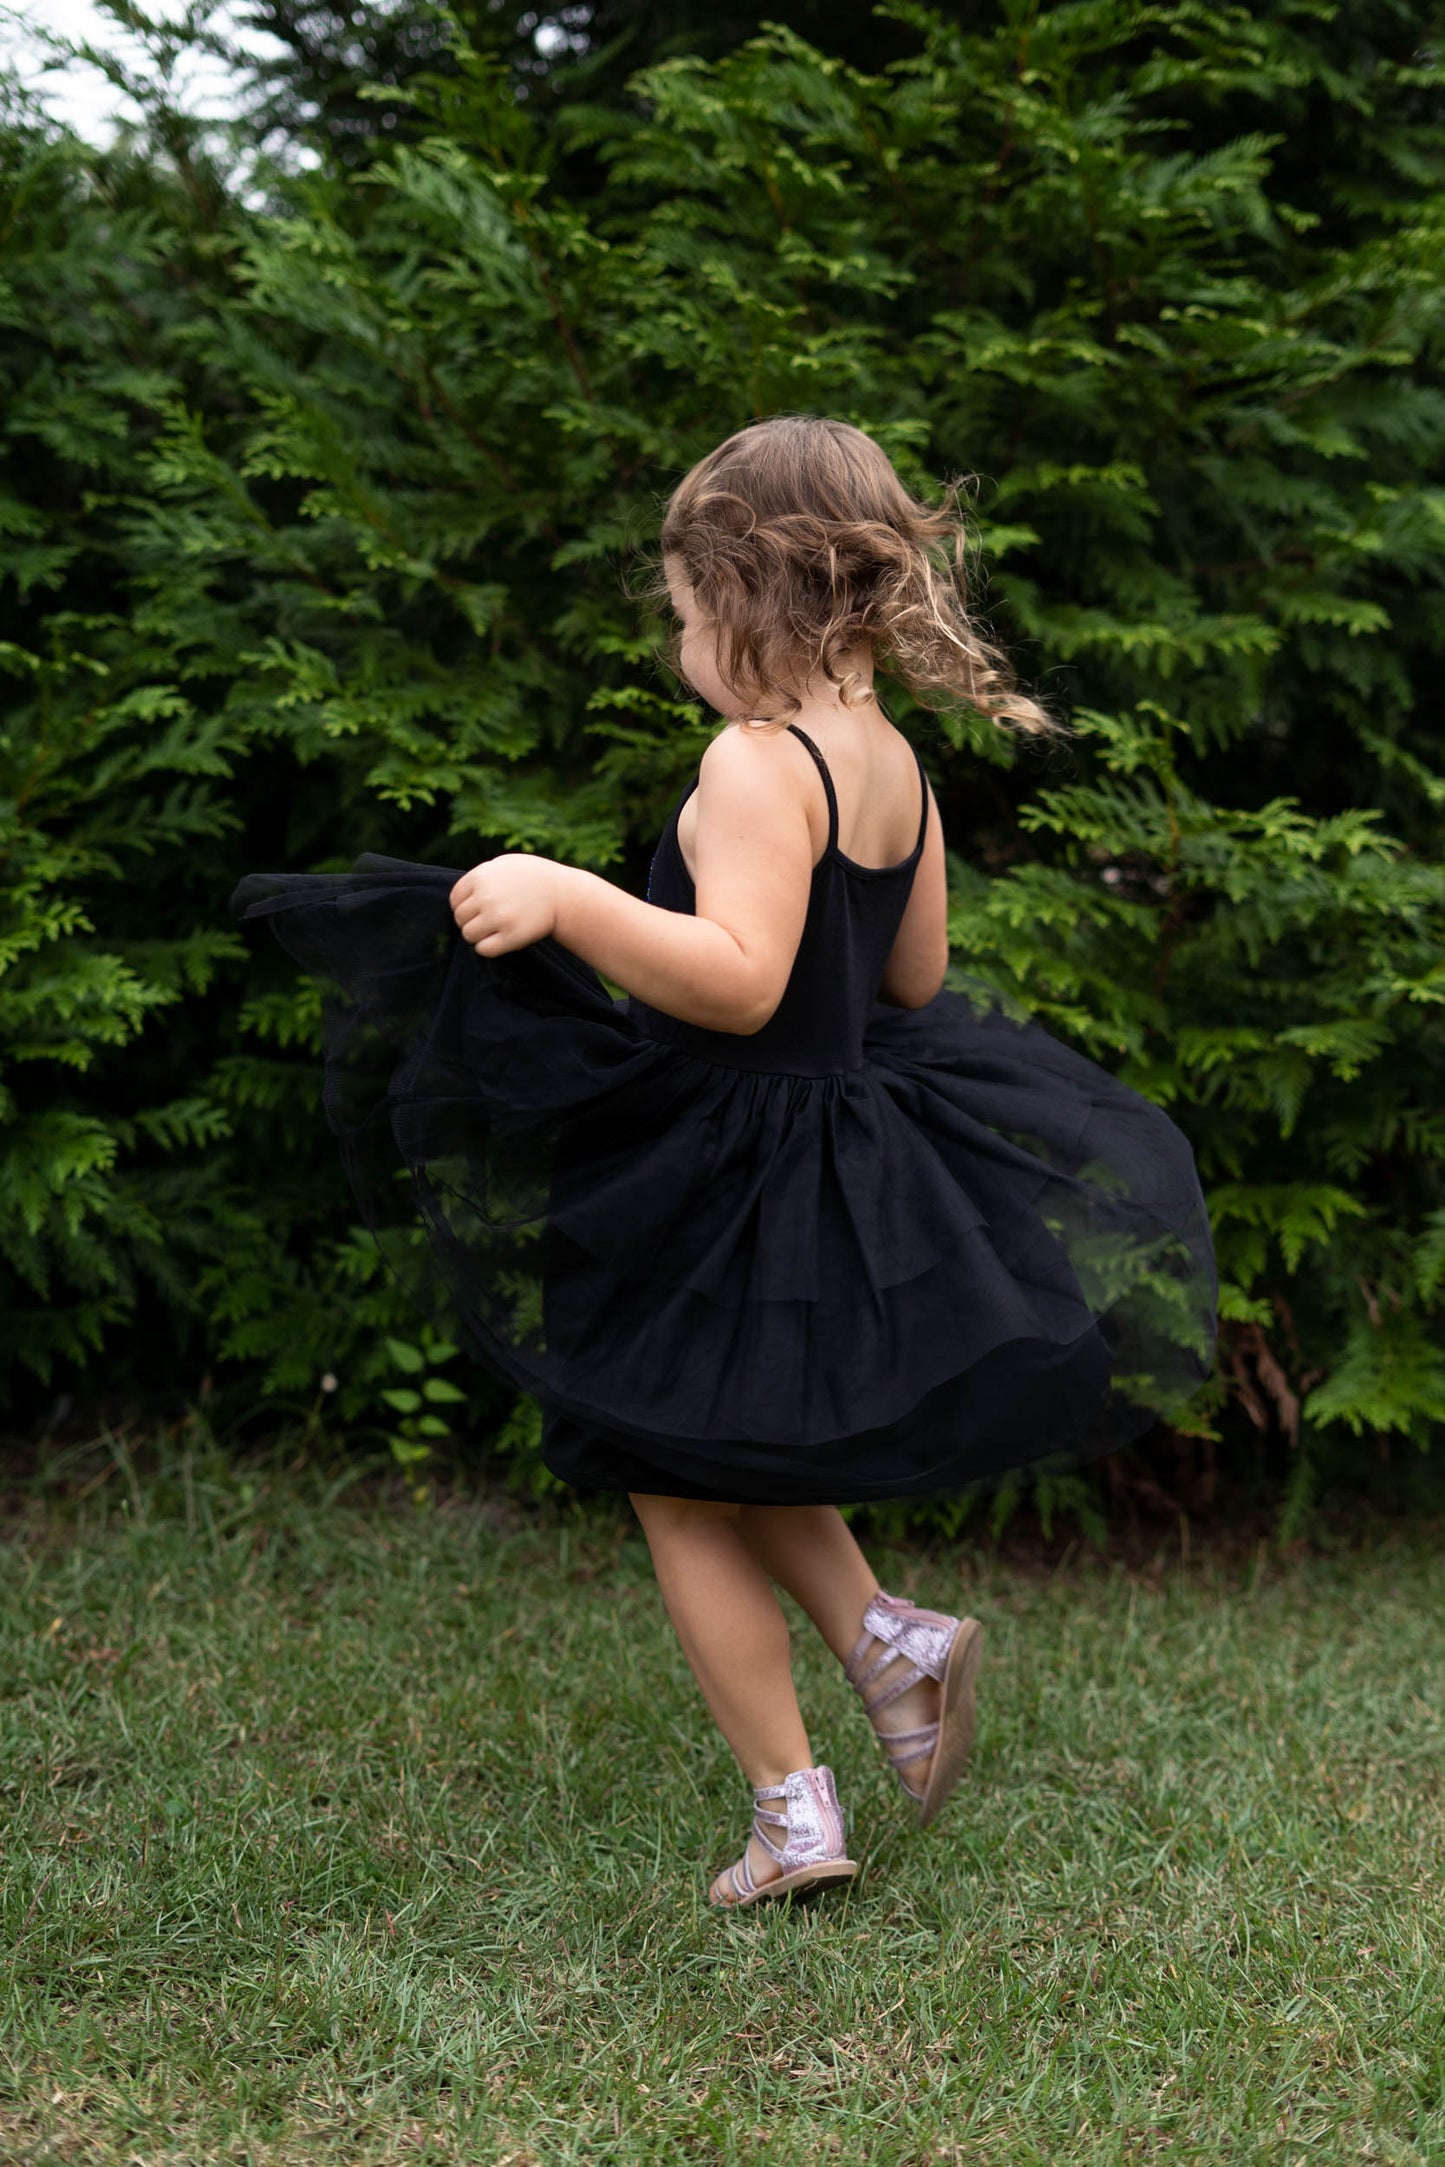 Girl's Black Butterfly Tutu Dress For 3-7 Years #22008